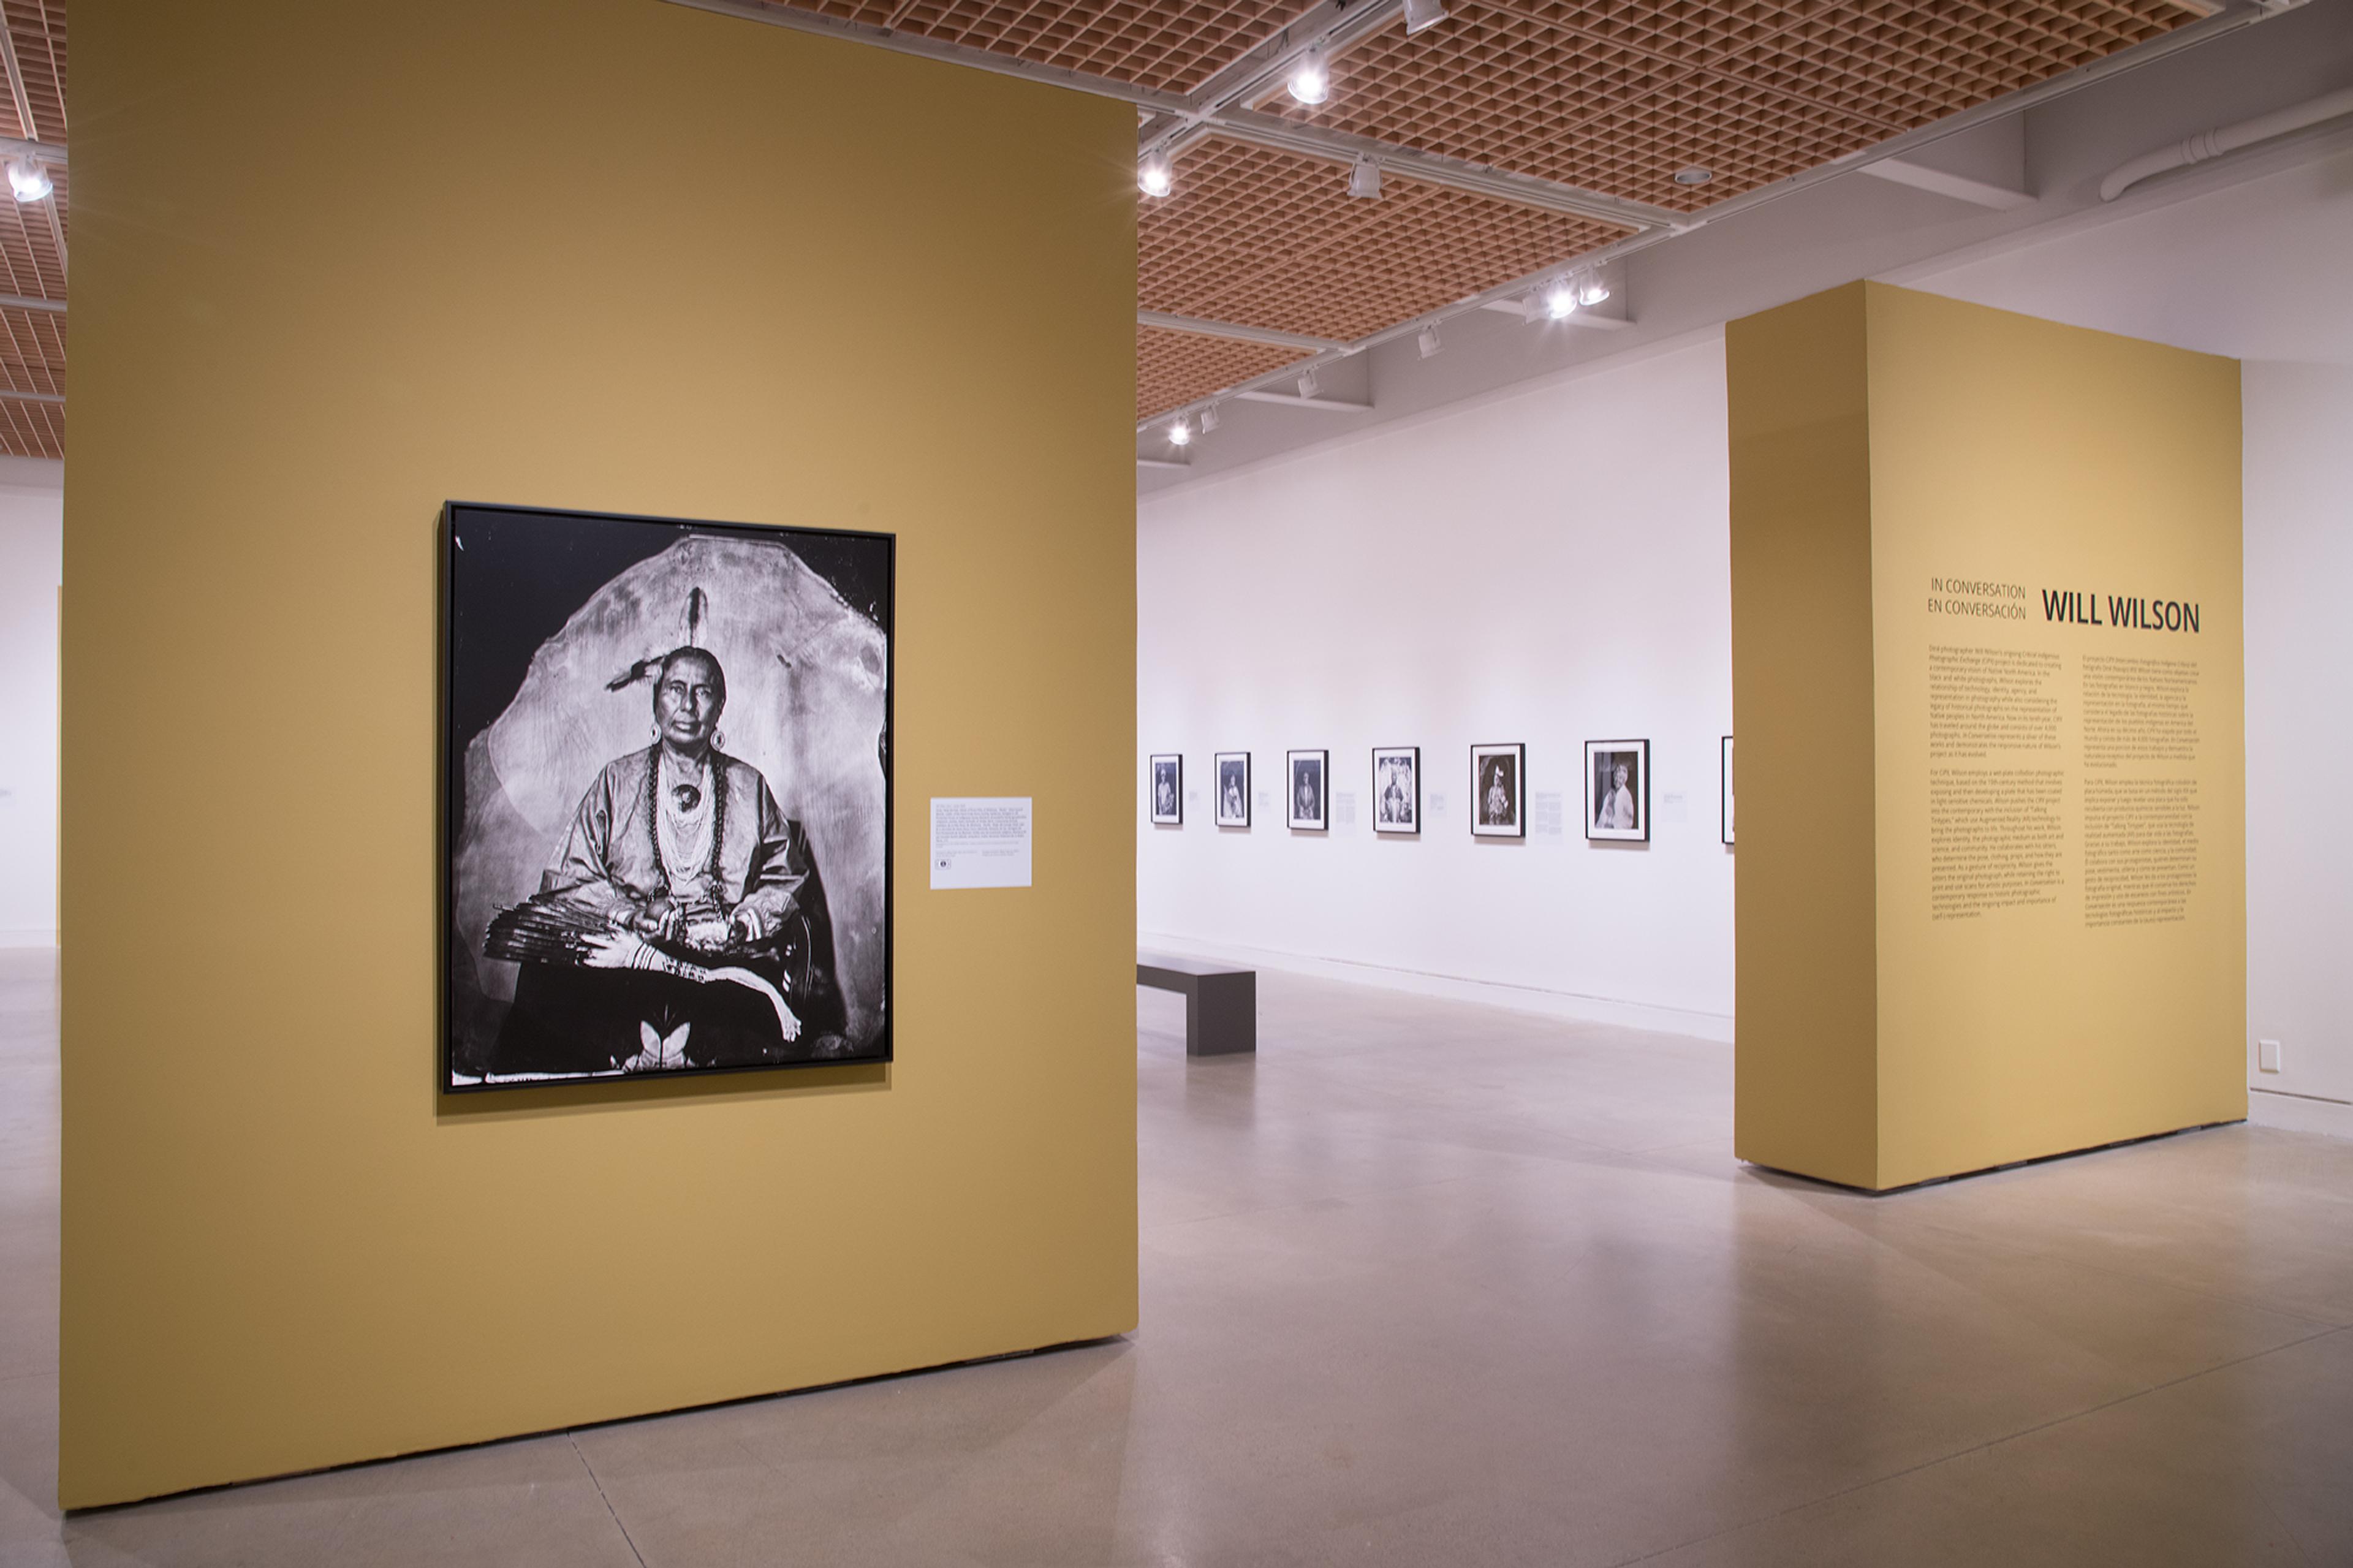 Will Wilson  Selection of 17 works from the Critical Indigenous Photographic Exchange (CIPX) project installation Delaware Art Museum Wilmington Delaware